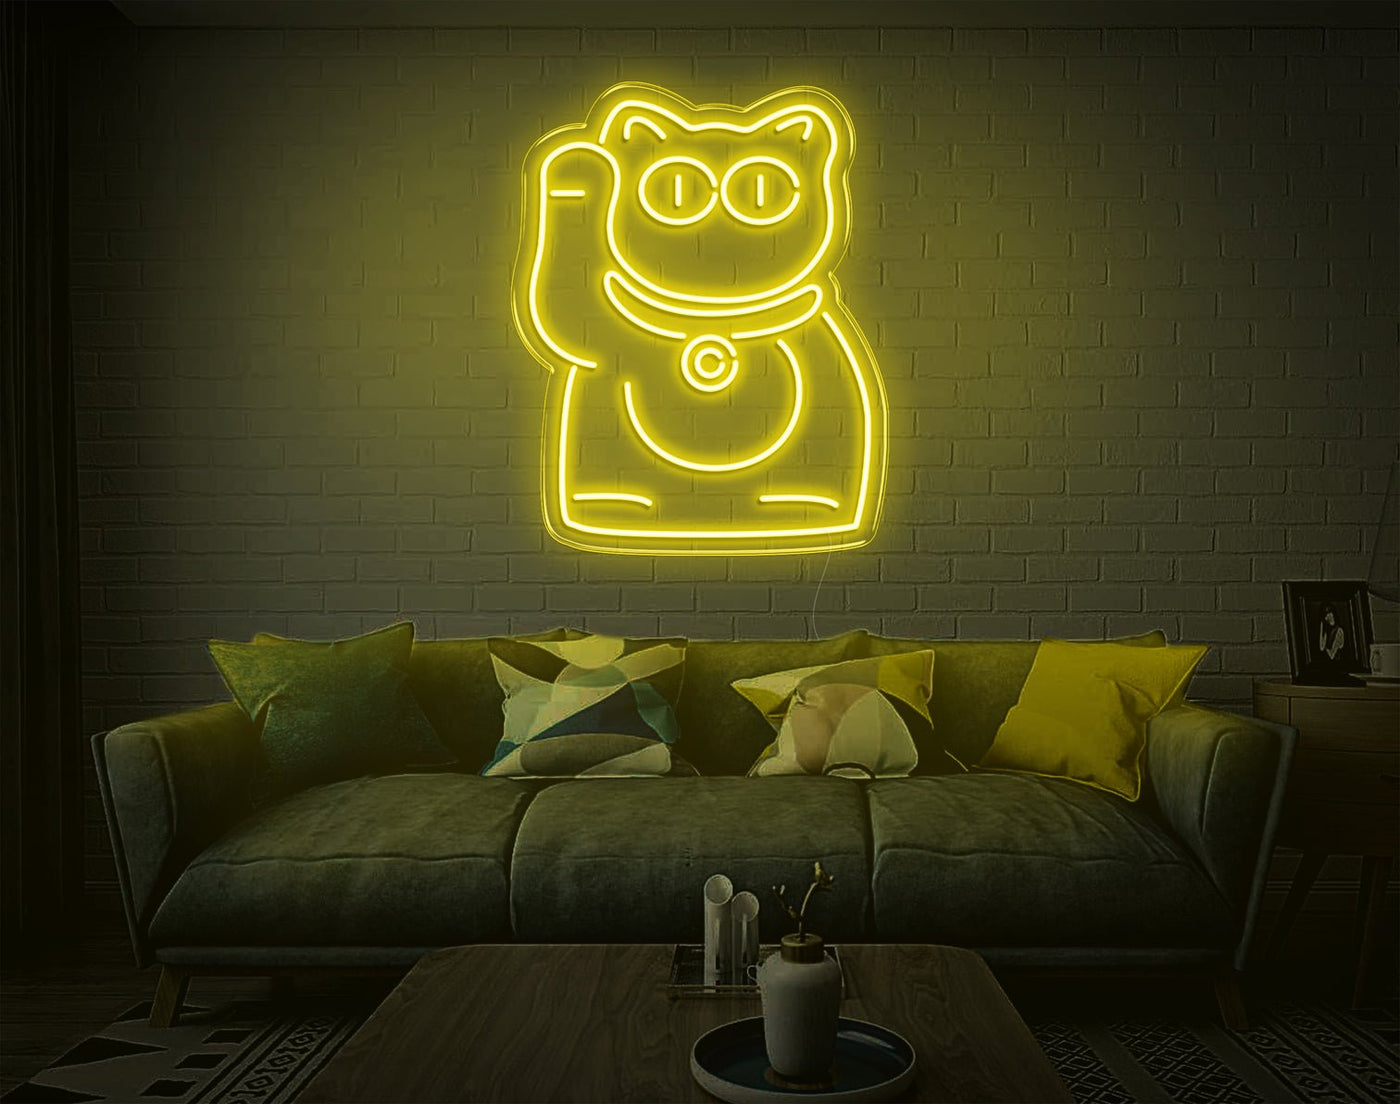 Cat V3 LED Neon Sign - 9inch x 7inchYellow